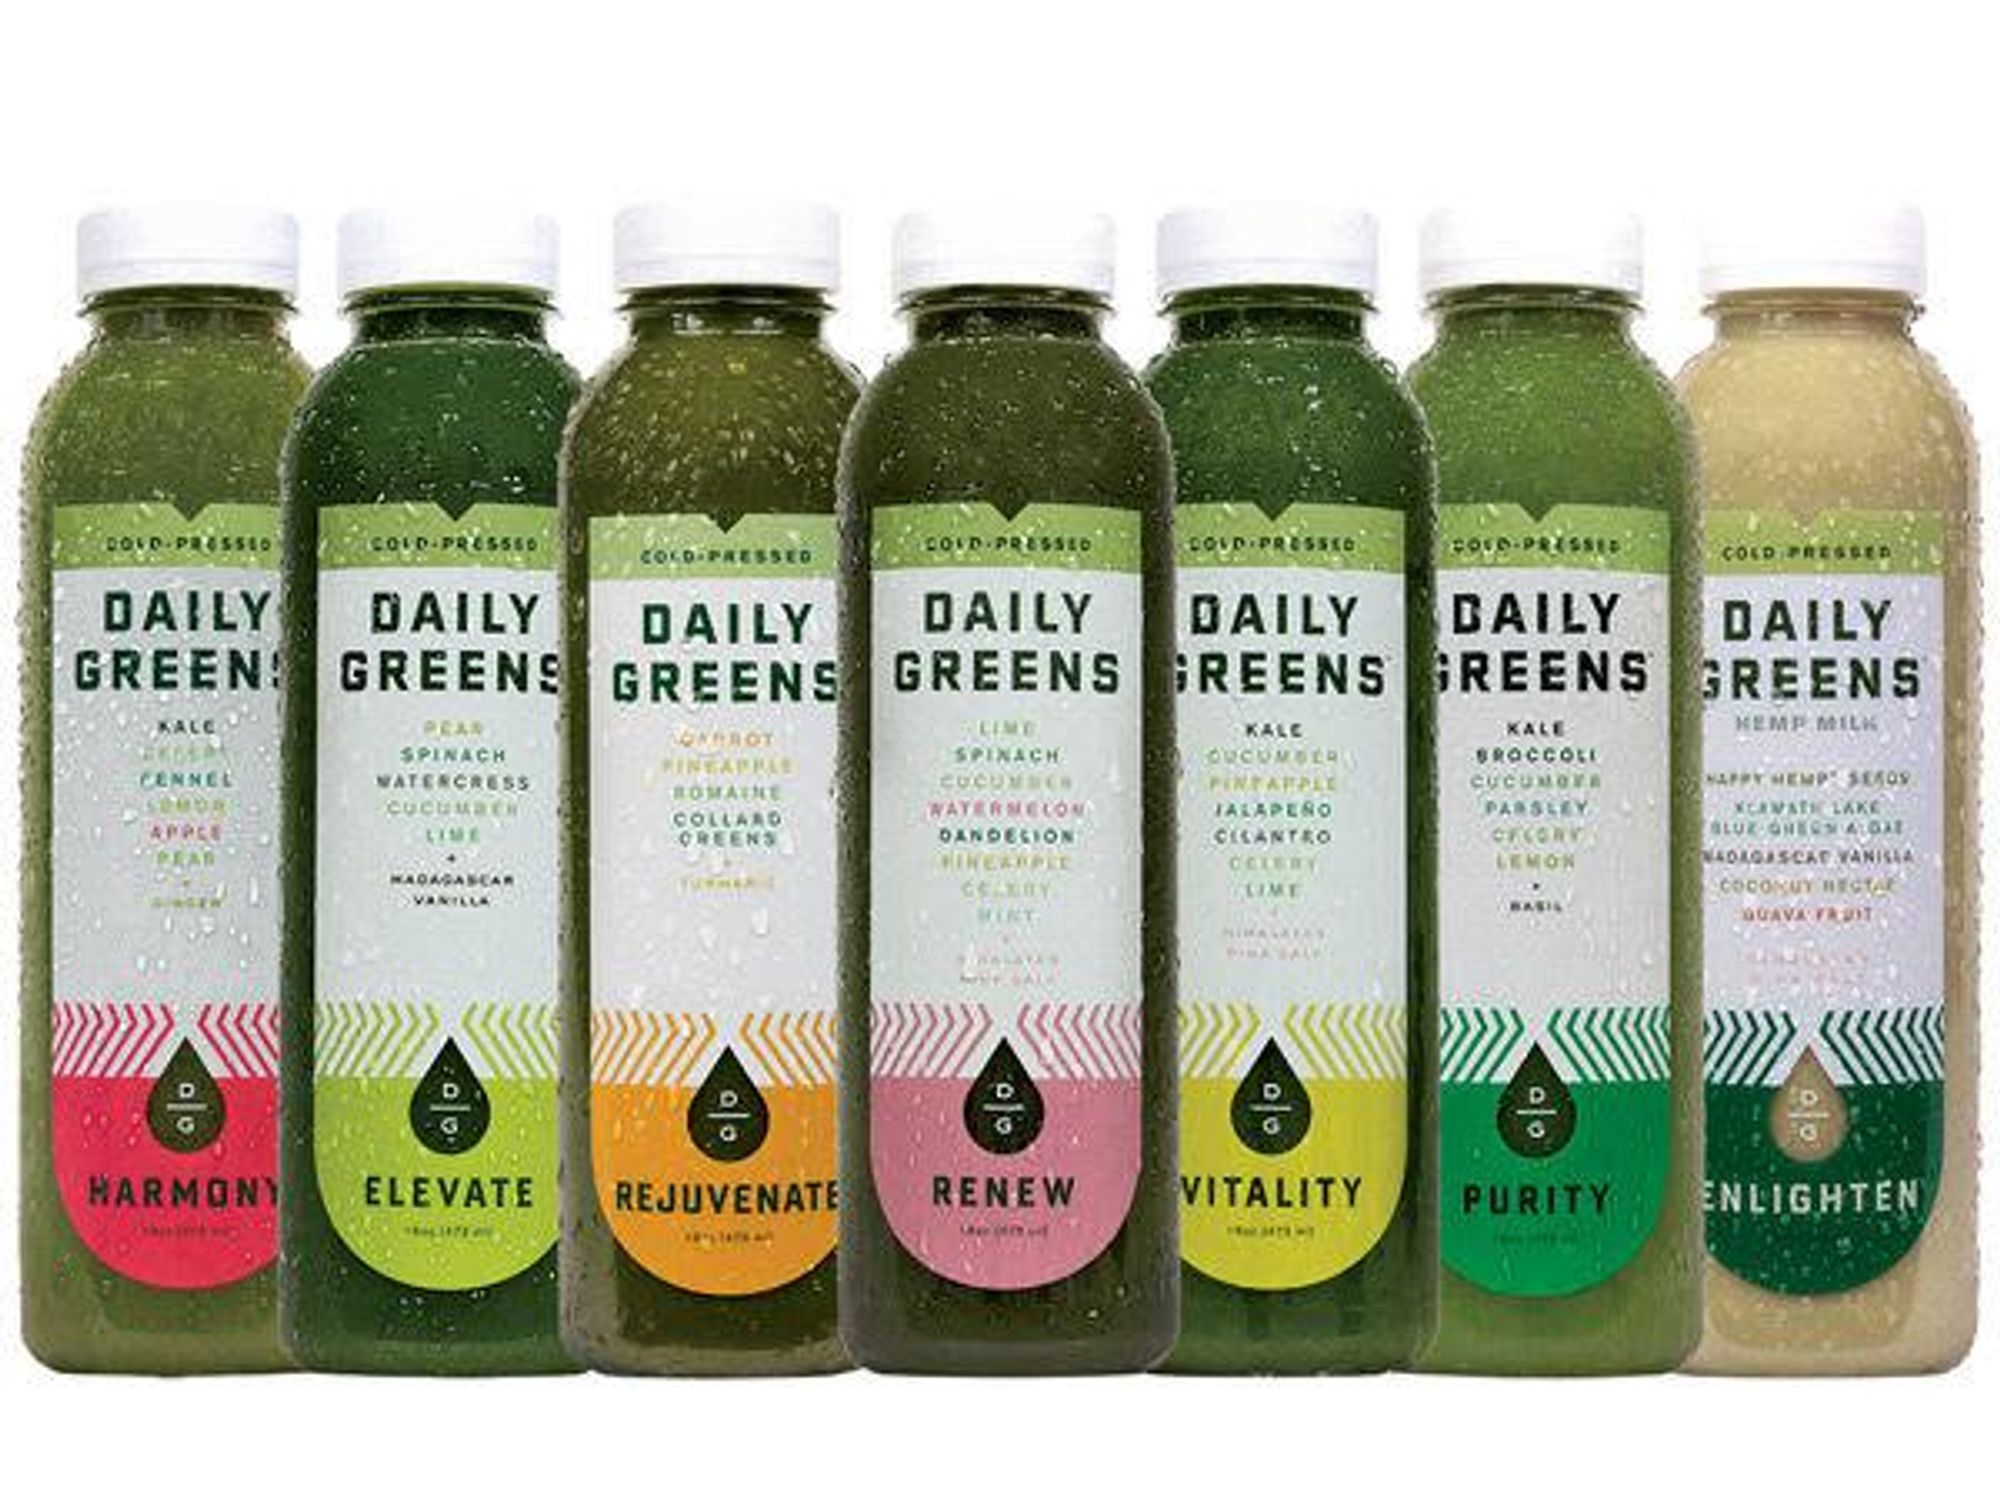 Daily Greens juice cleanse bottle